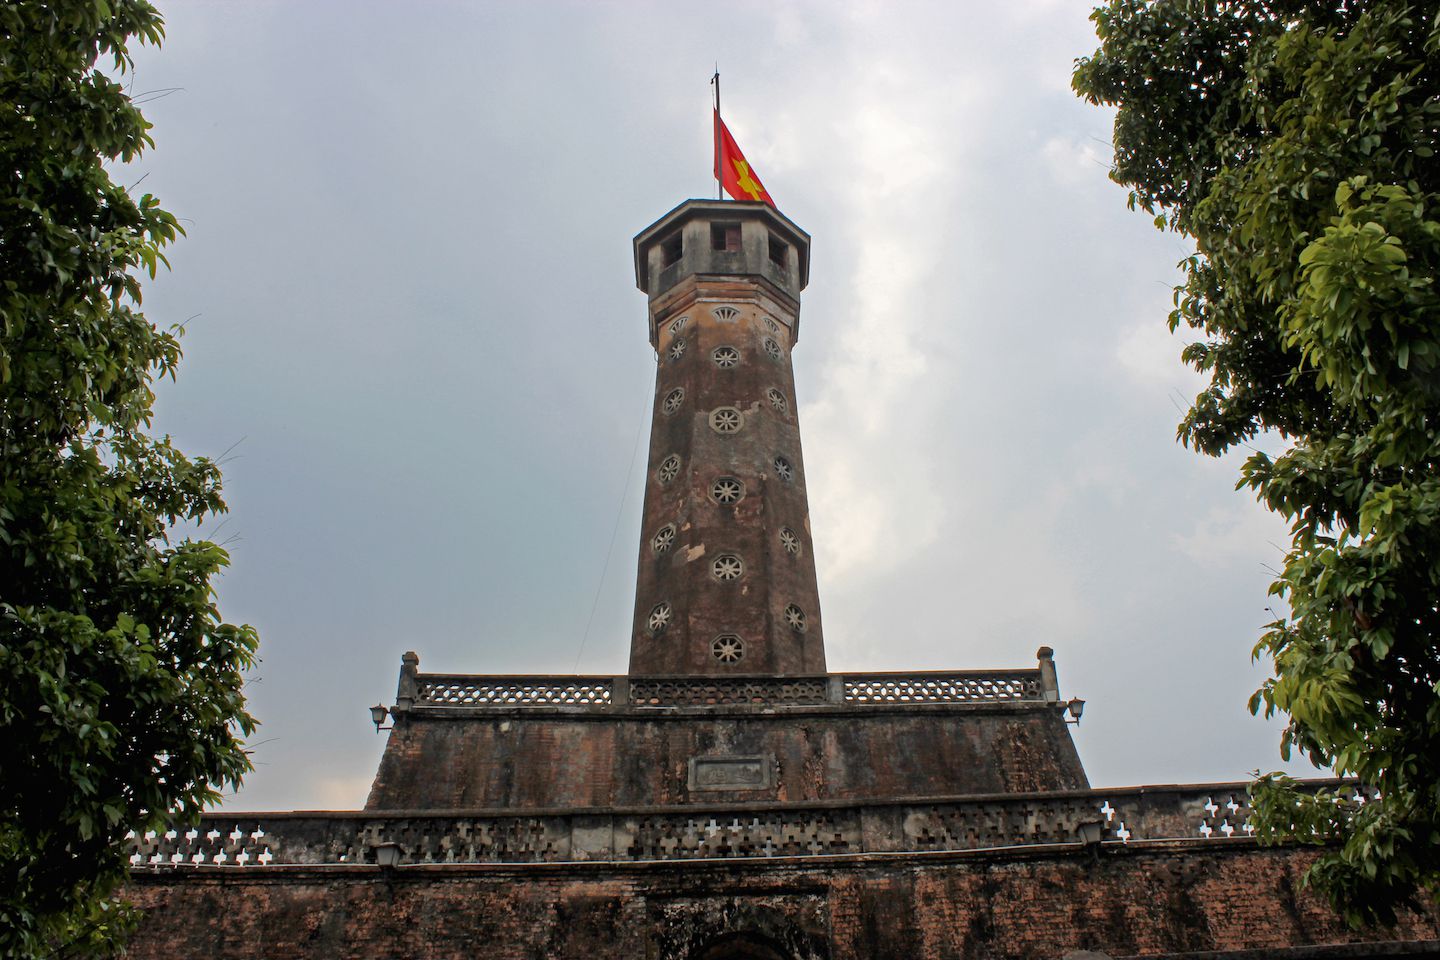 Close-up of the Flag Tower